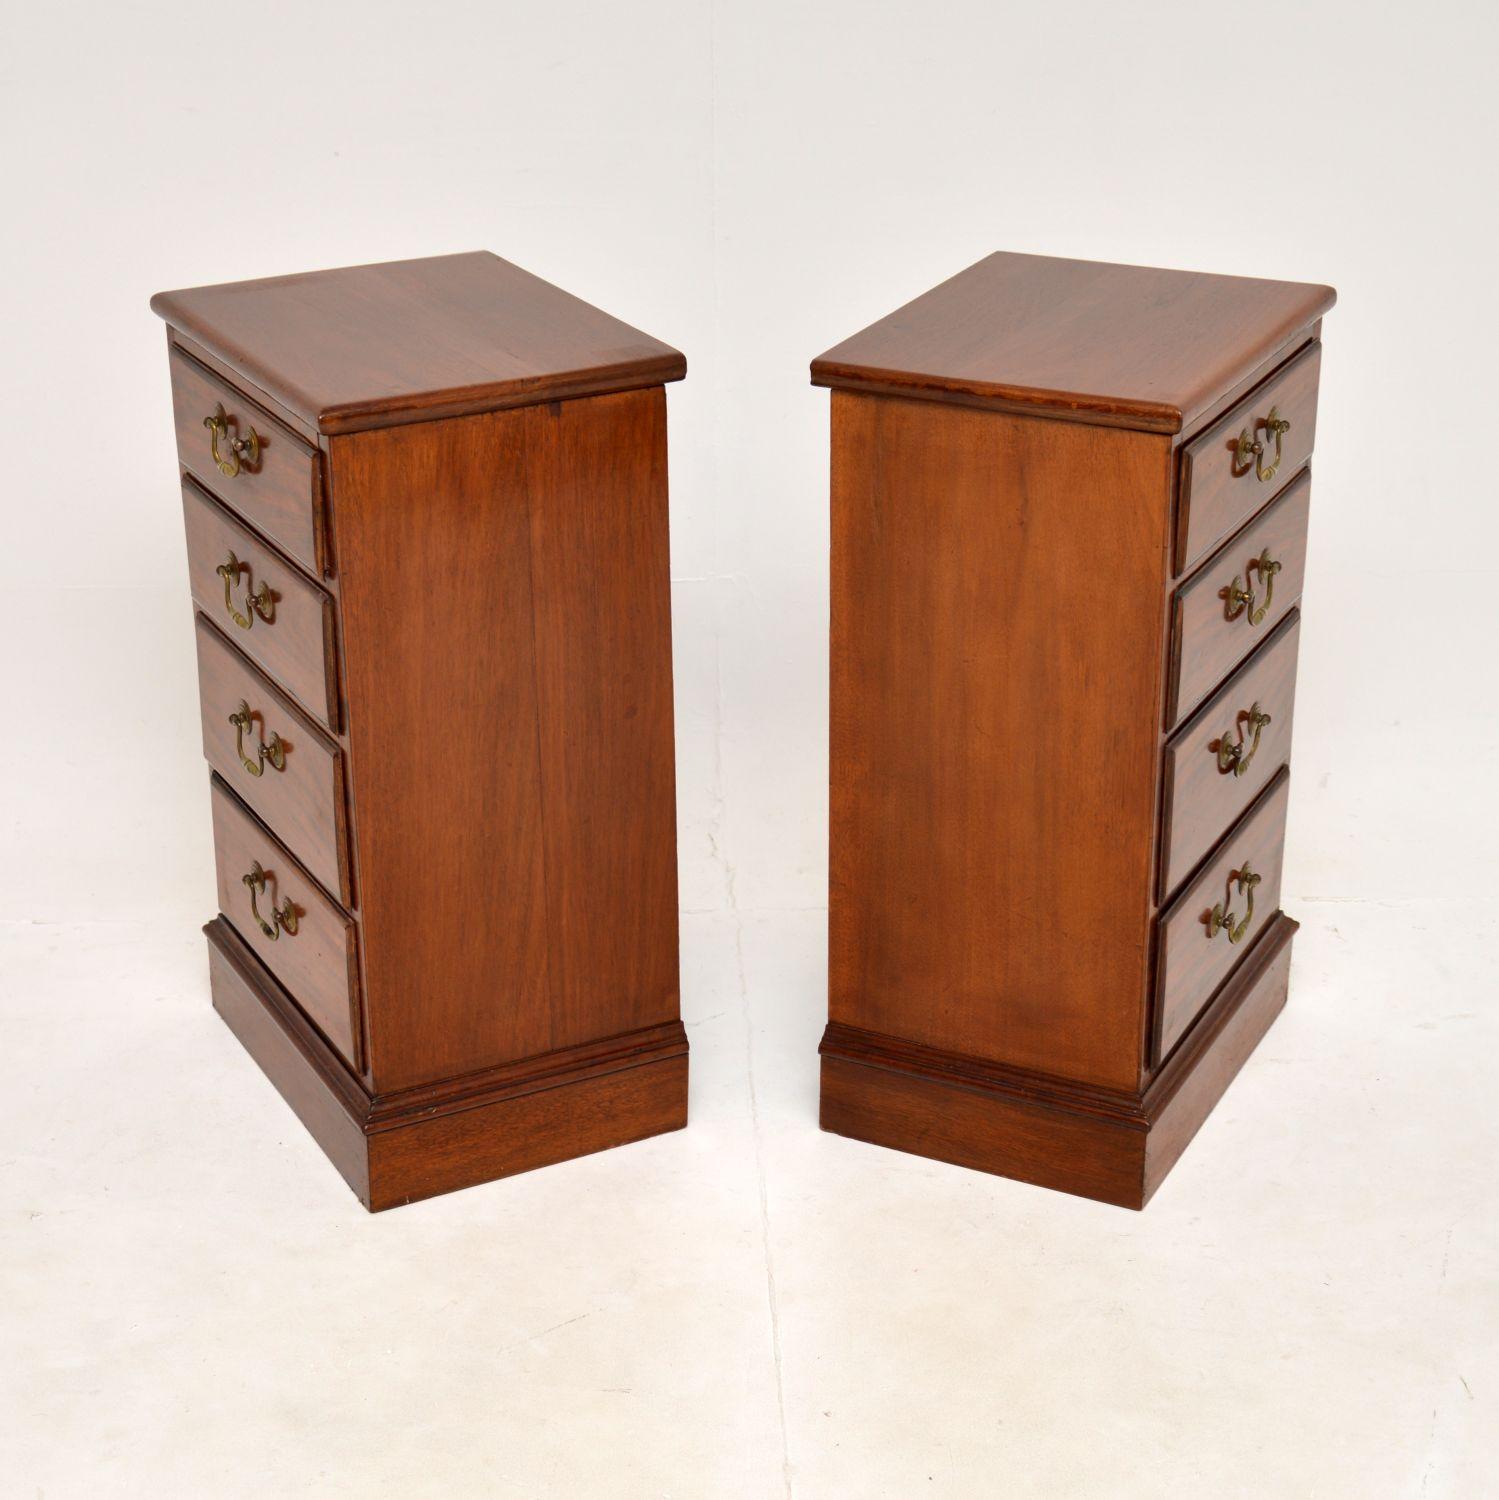 British Pair of Antique Bedside Chests